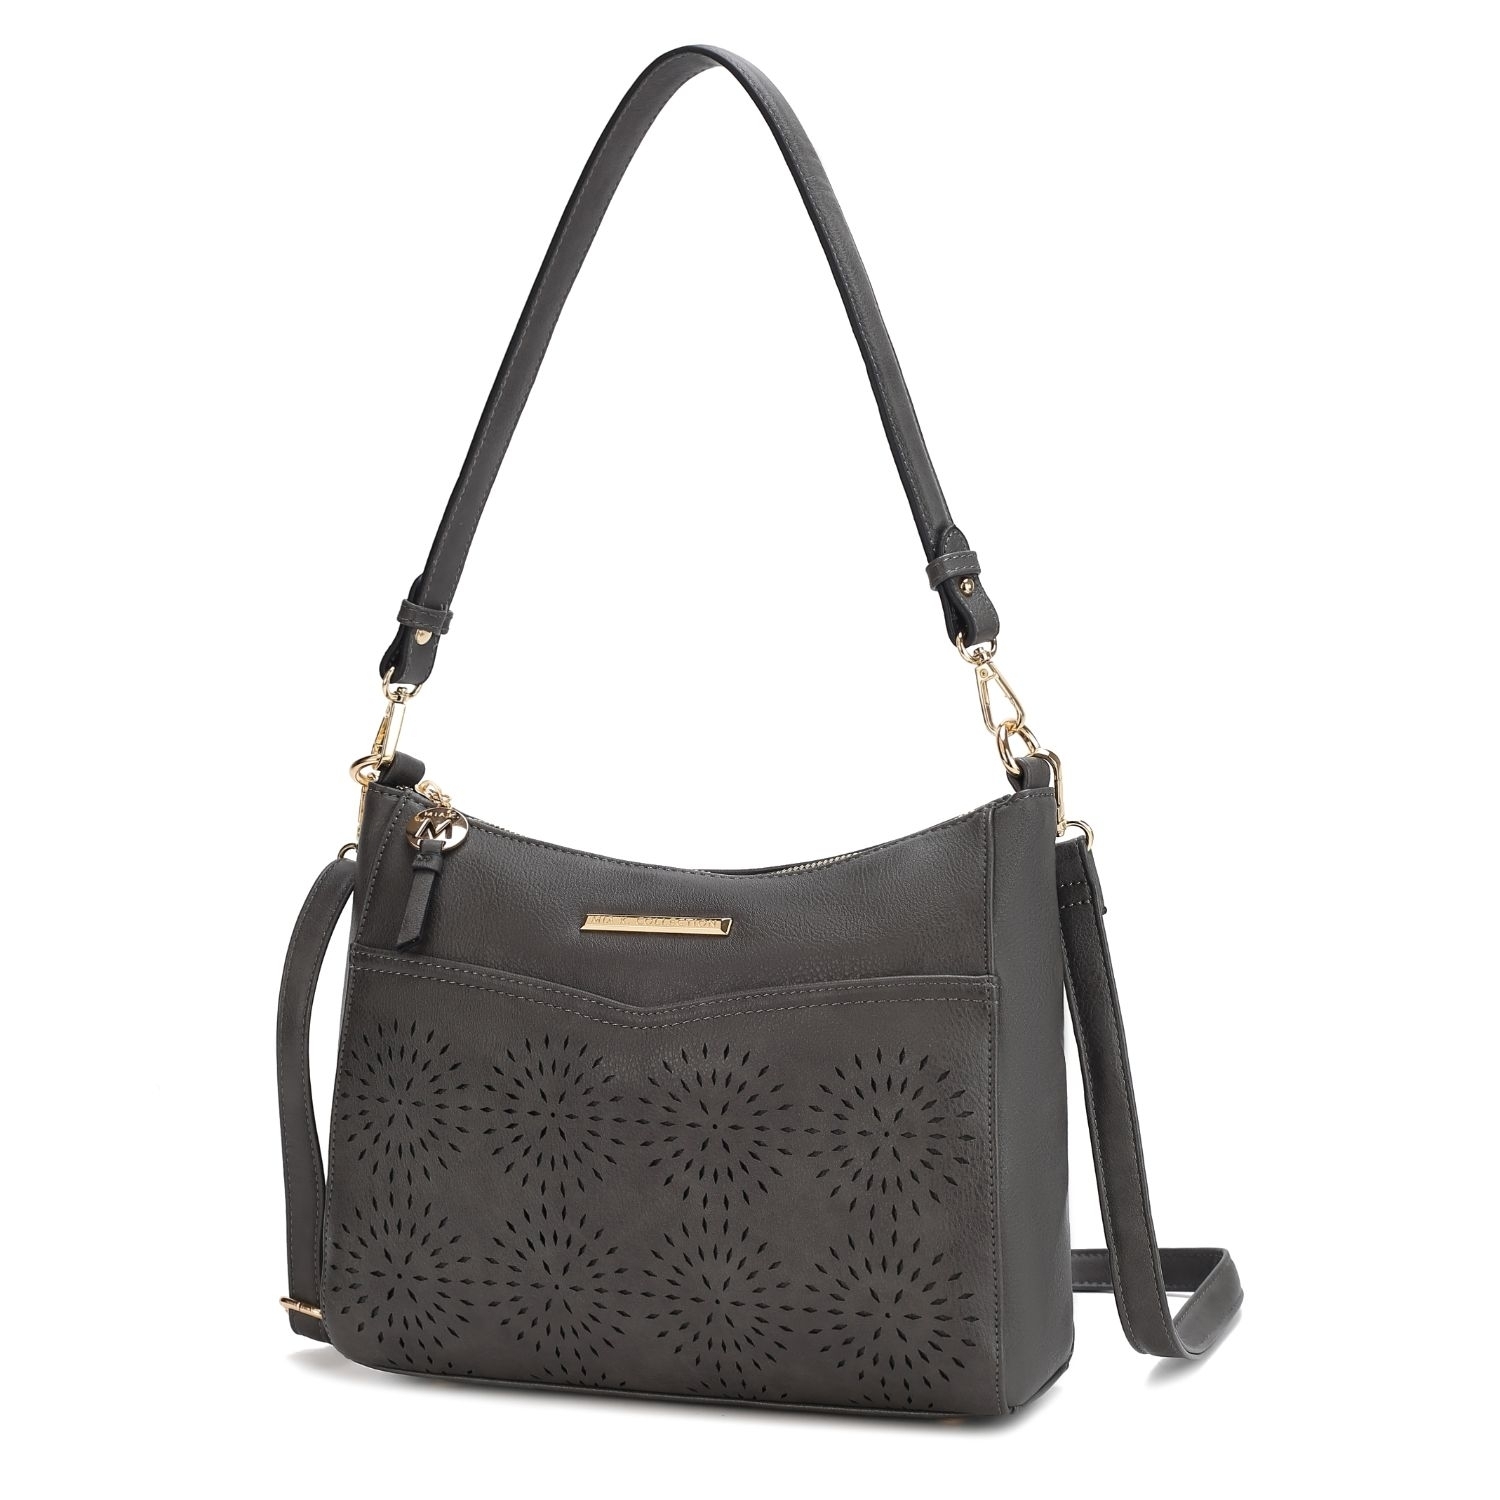 MKF Collection Alanis Laser Cut Vegan Leather Women's Shoulder Bag By Mia K - Charcoal